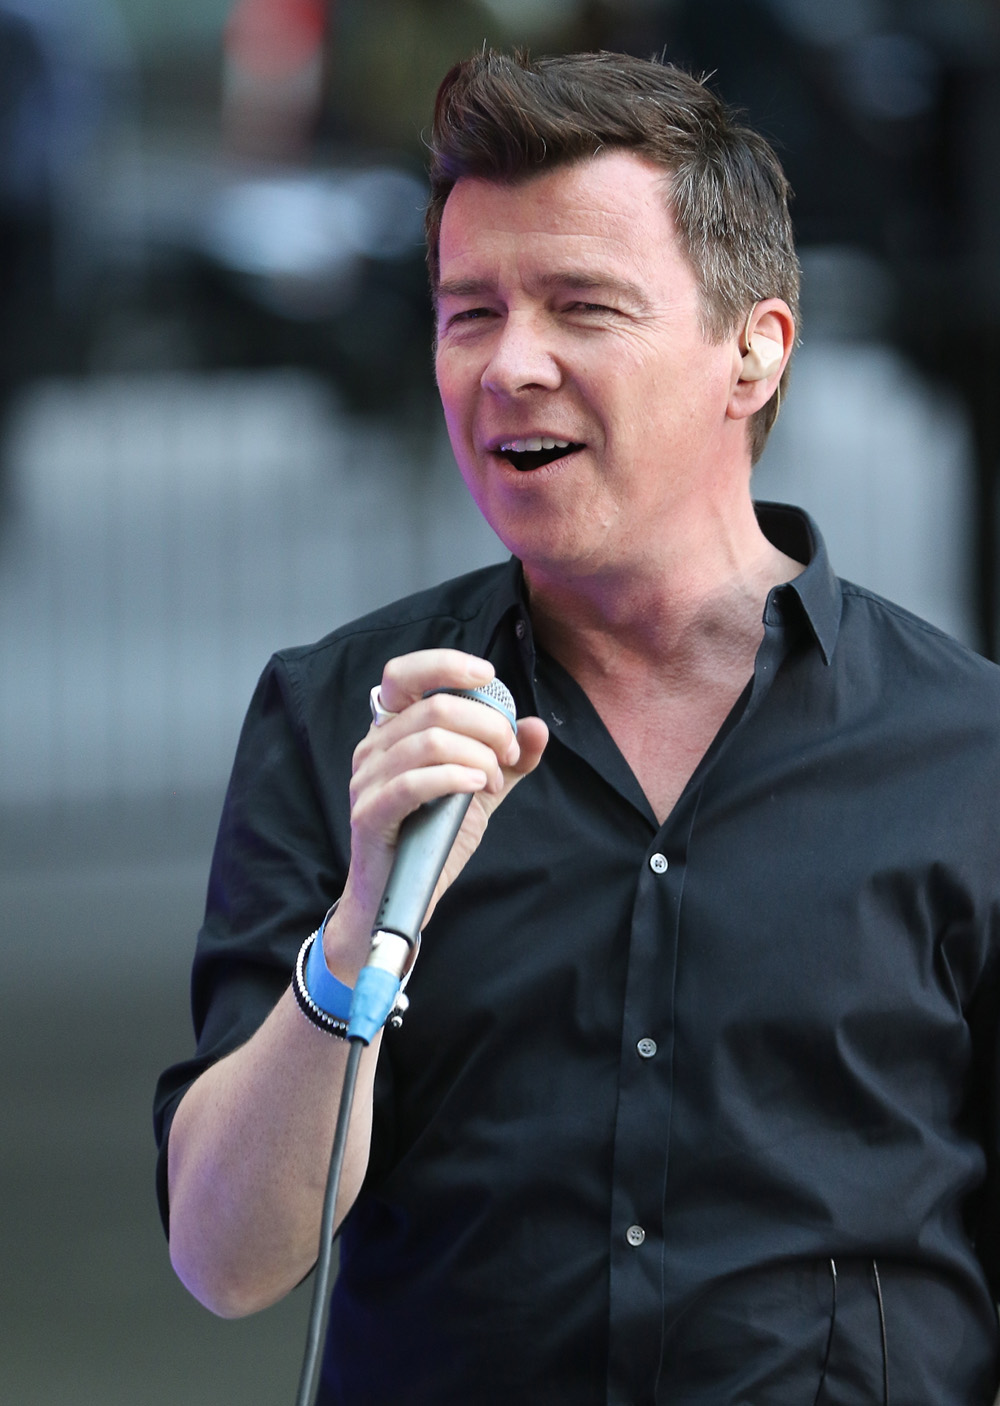 Rick Astley never gave us up - and tops the British charts once again: View...